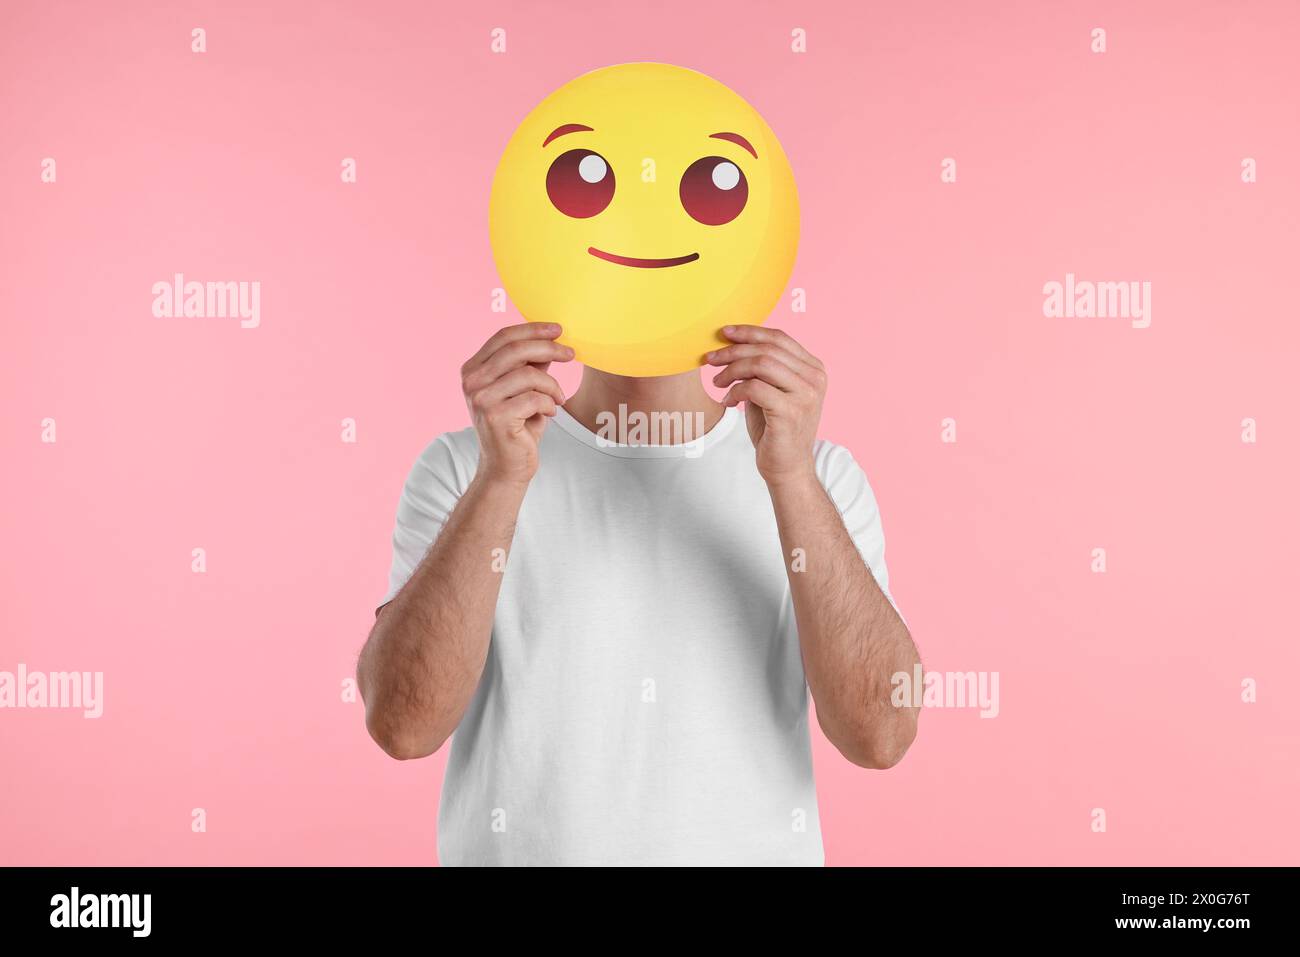 Man covering face with smiling emoticon on pink background Stock Photo